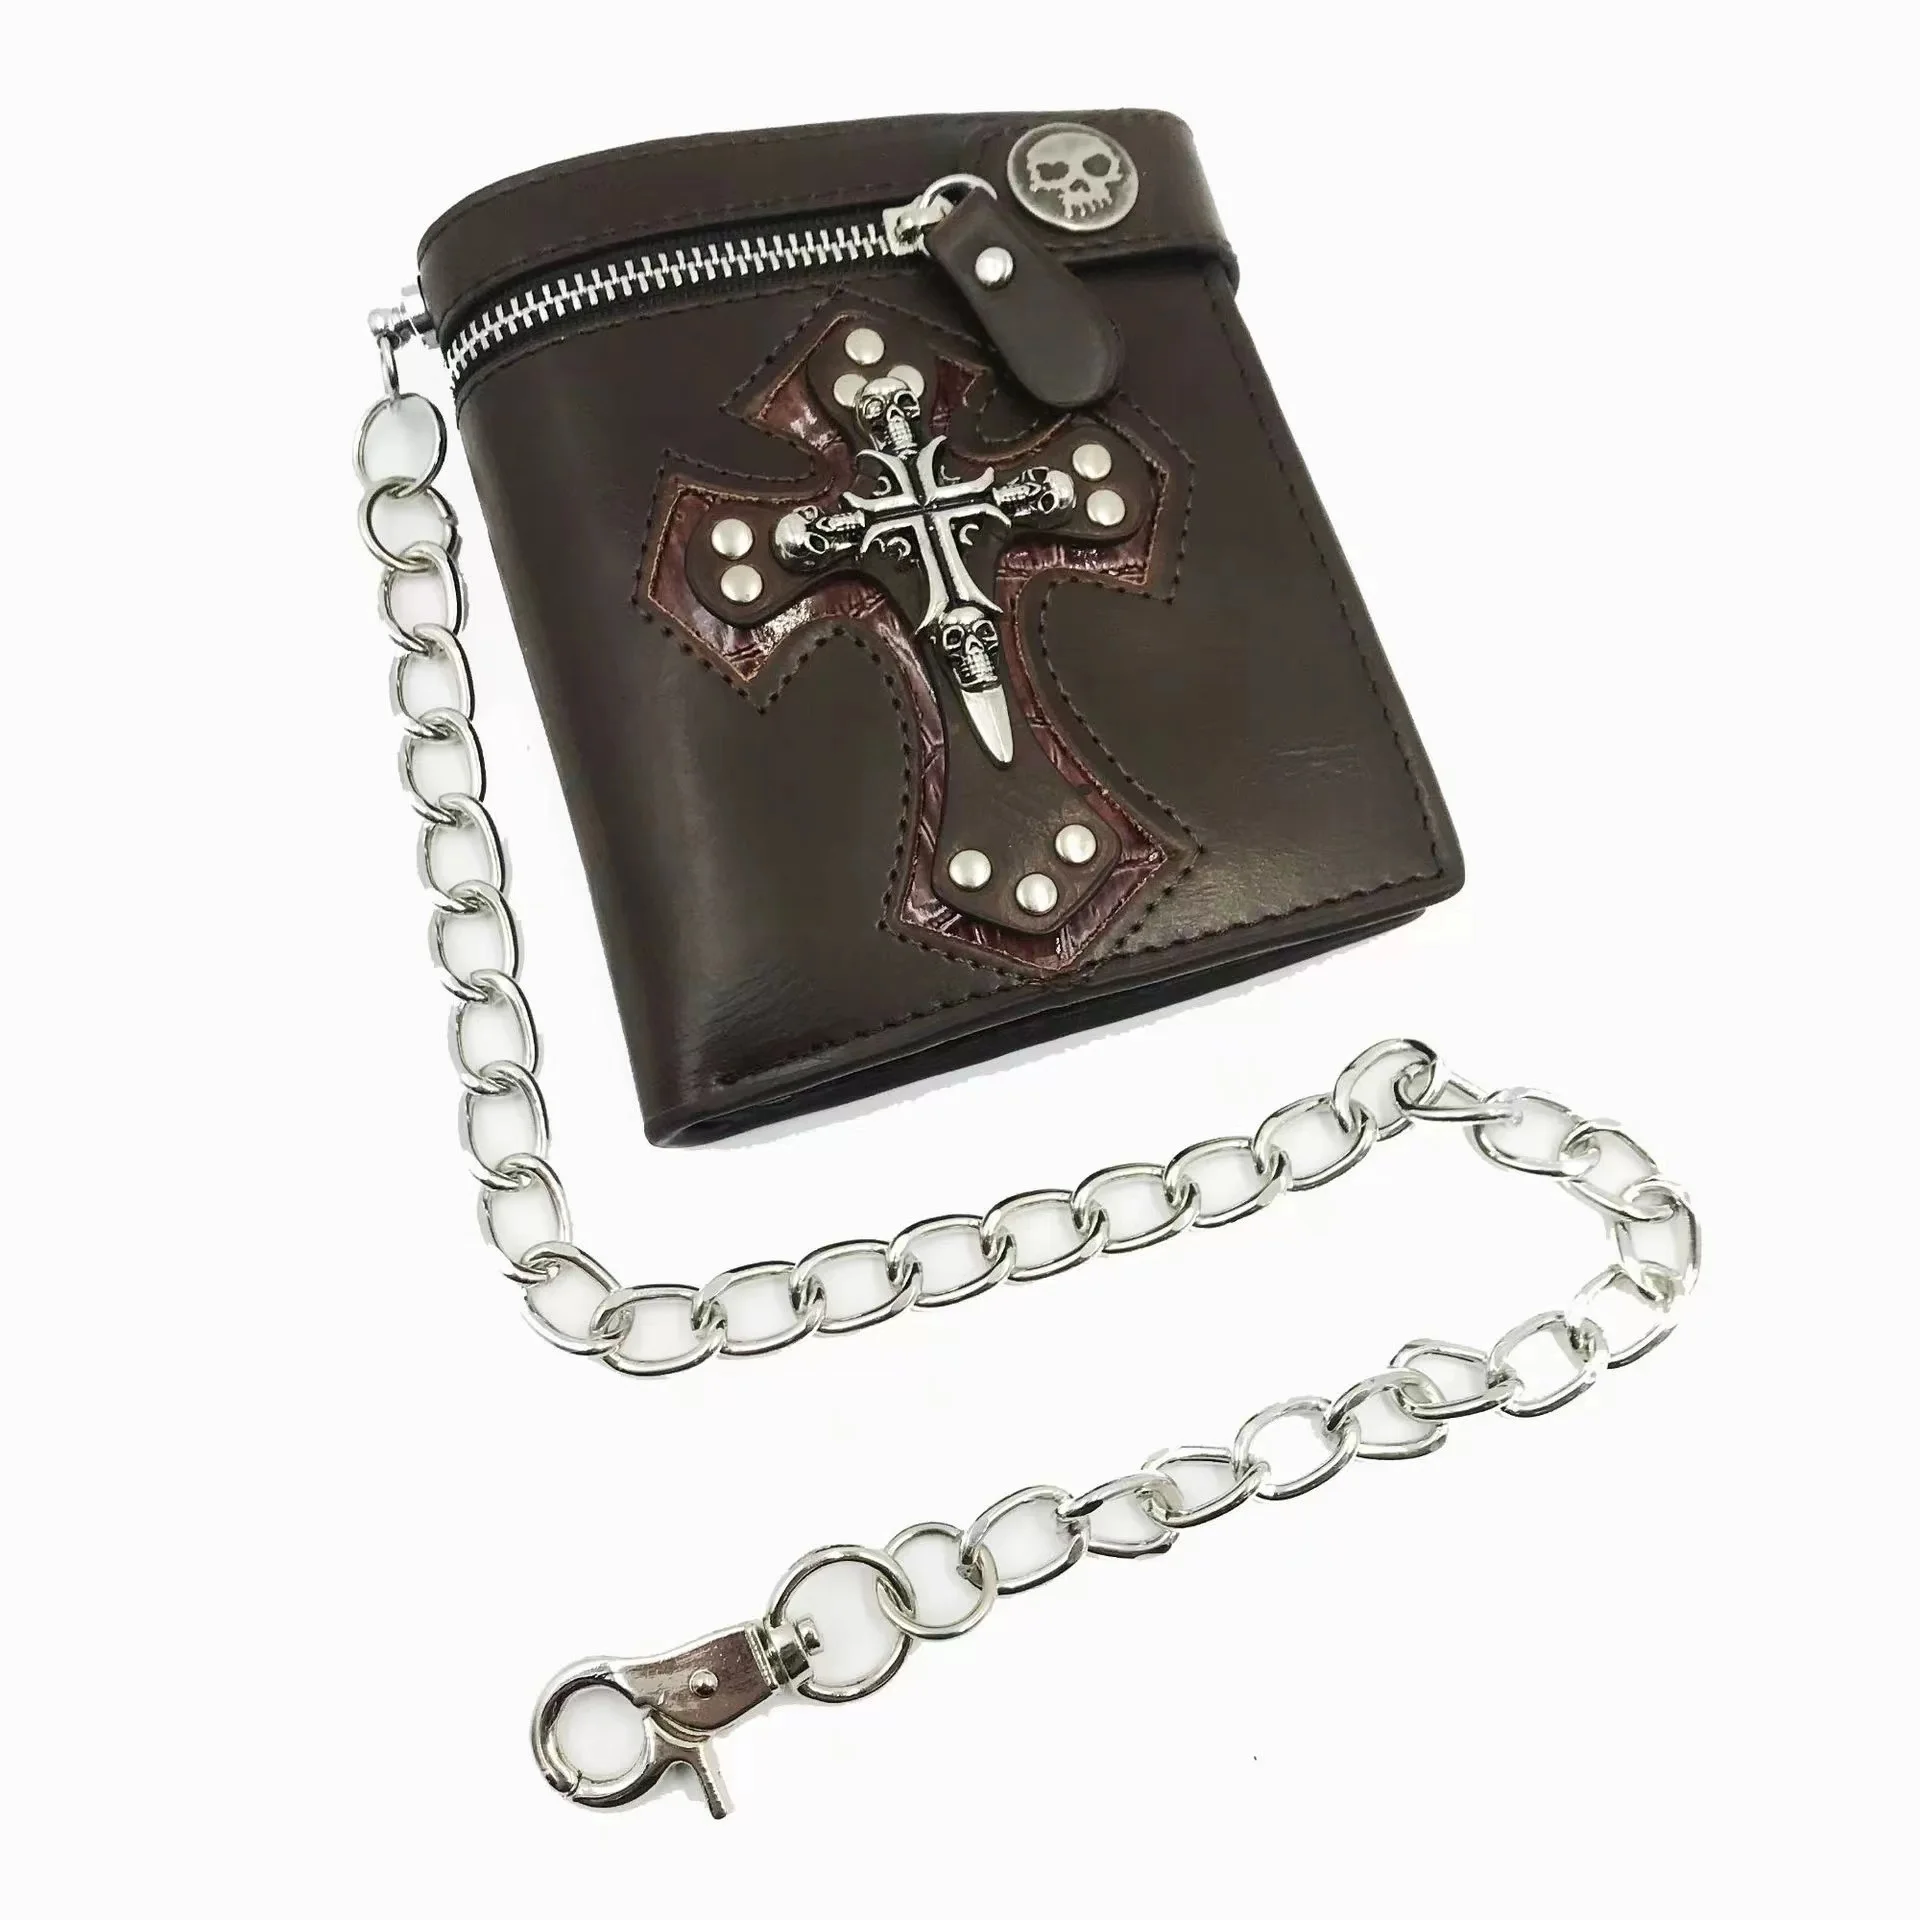 New Personality Skull Cross Inlaid Men's And Women's Purse High-Quality Leather With Anti-Theft Chain Fashion Wallet